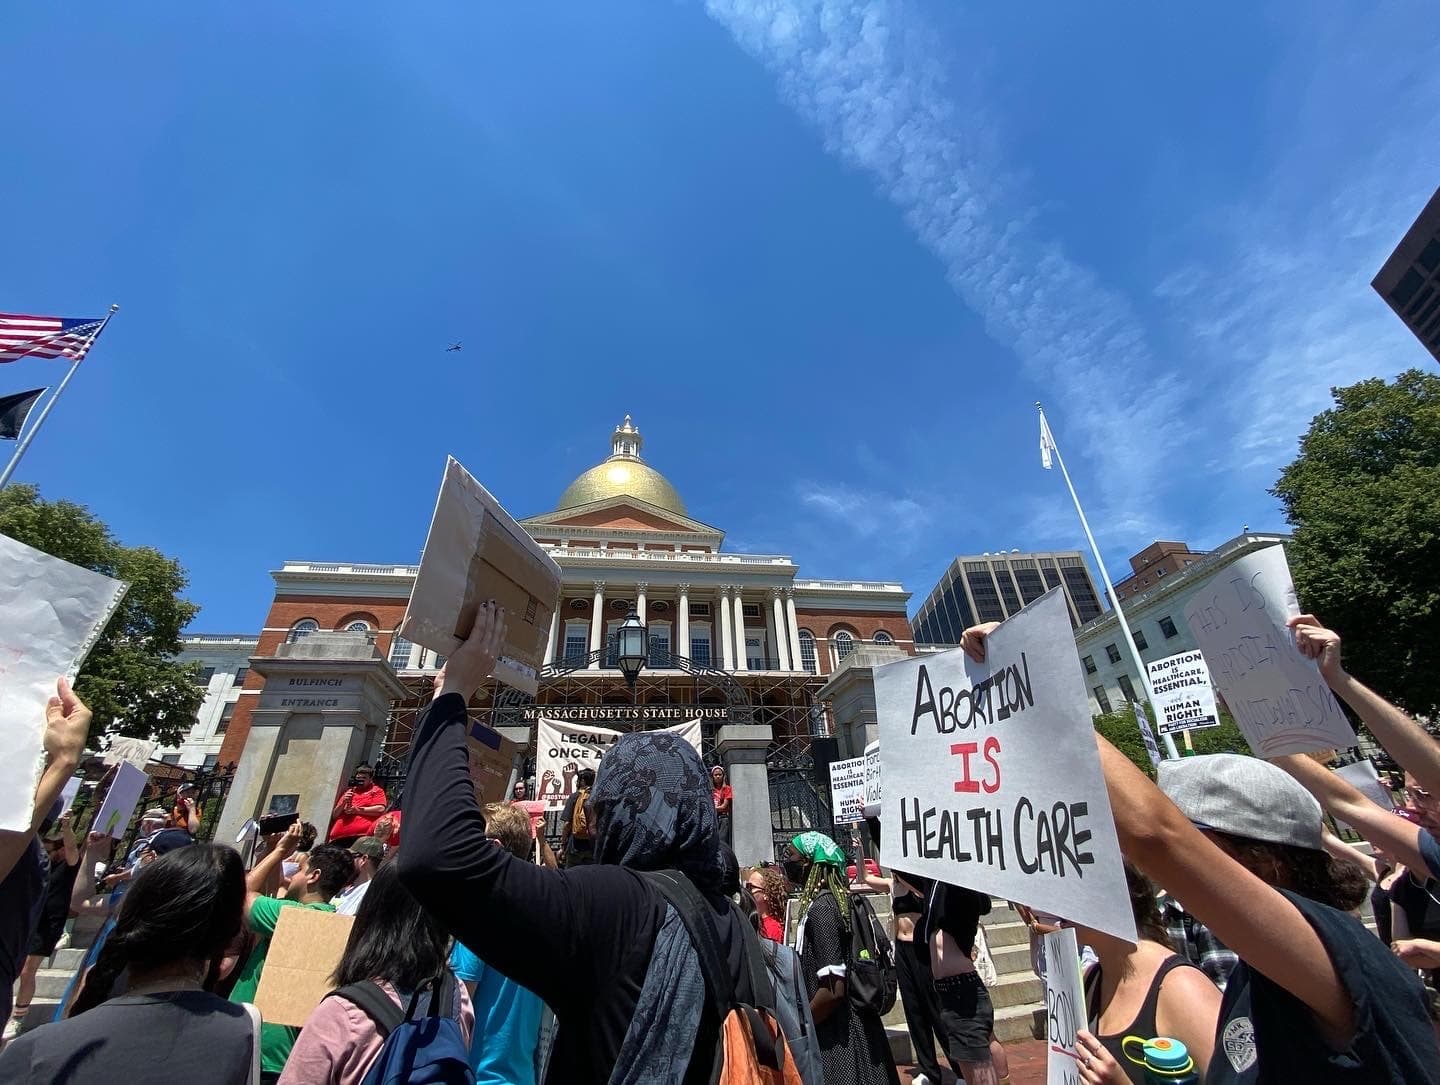 Protestors outside the Massachusetts State House for a second day in a row after the Supreme Court reversal of Roe v. Wade. (Amanda Beland/WBUR)